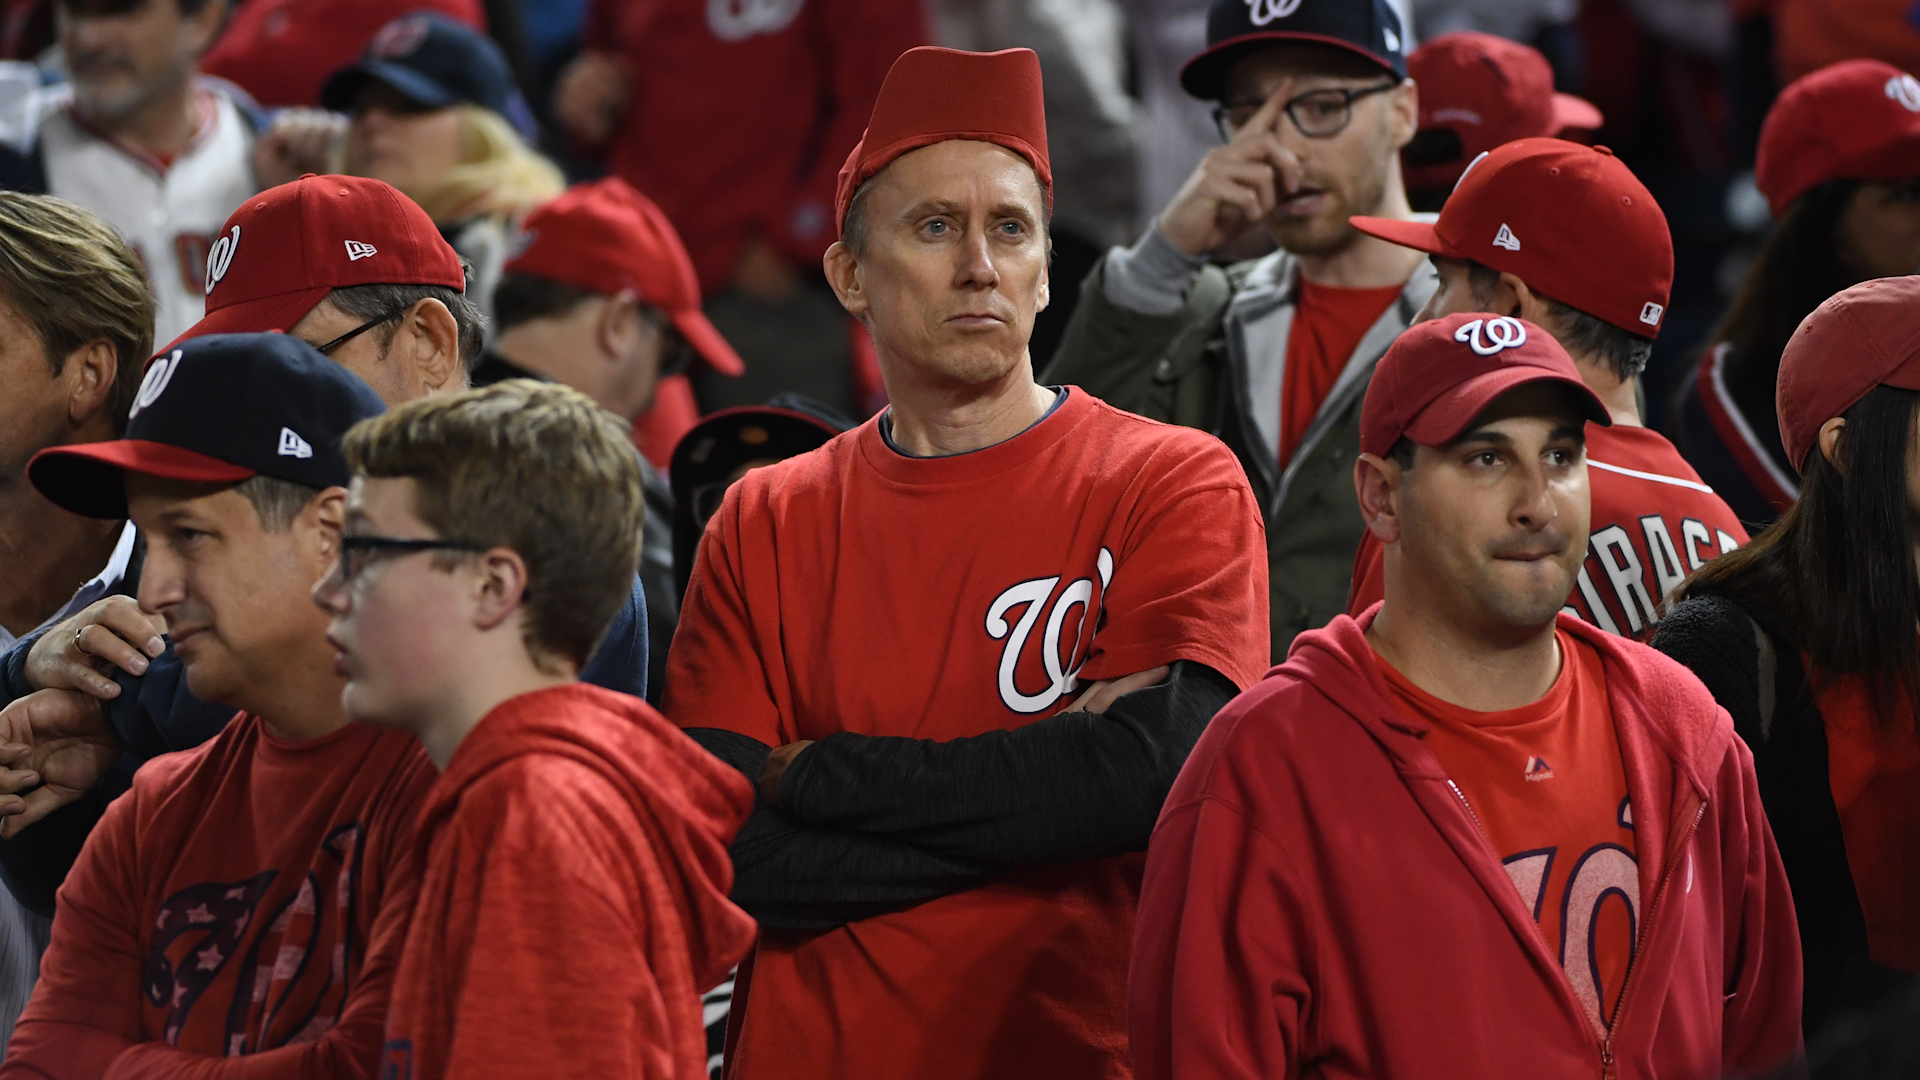 Do You Miss Baseball? Here's How the Pentagon Might Have Predicted the  Nationals' World Series Upset - Defense One